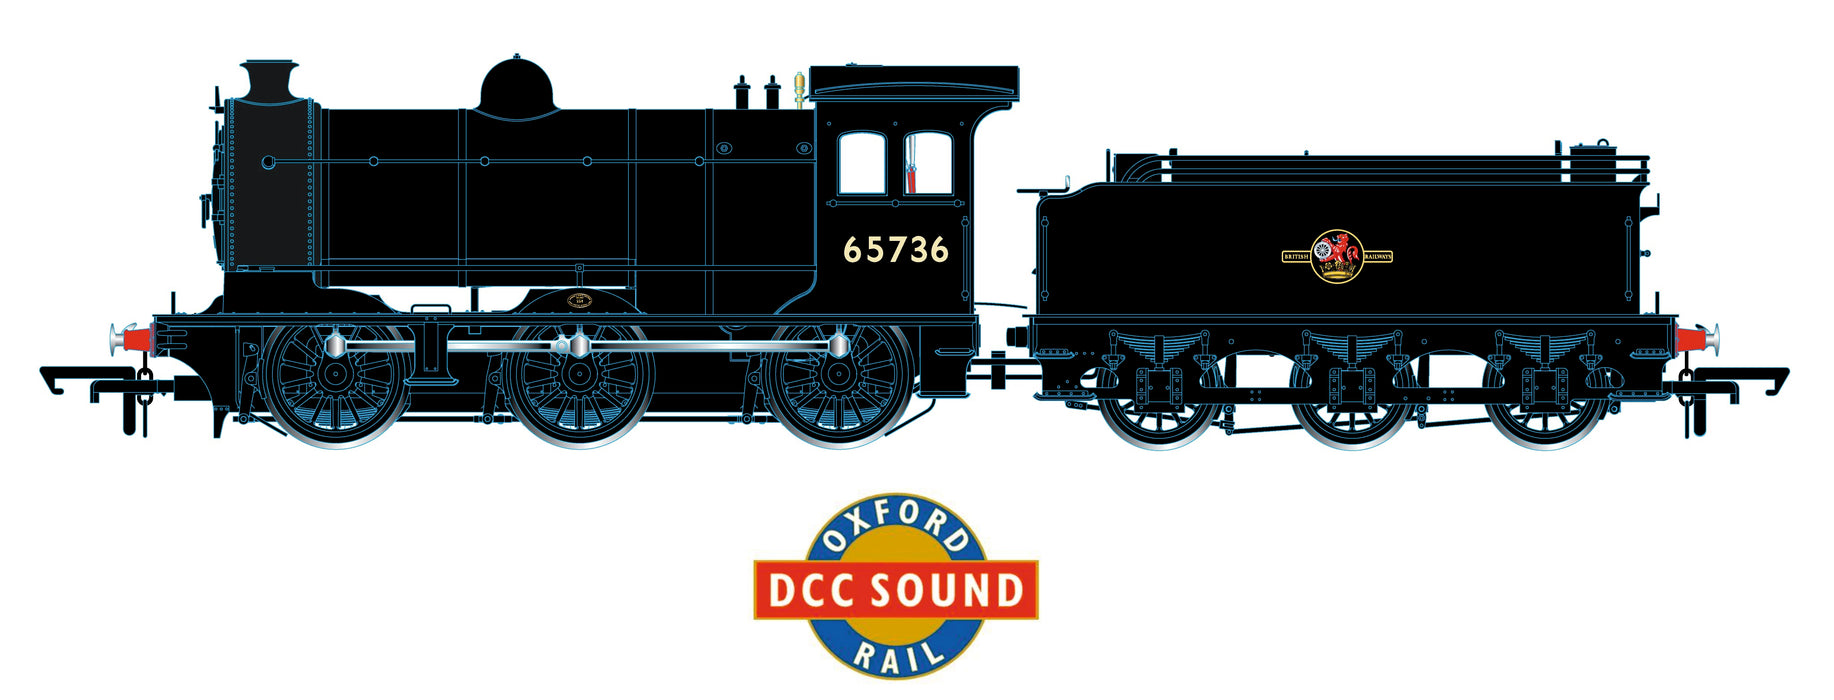 BR Late (plain black) 65736 0-6-0 Class J26  Sound Fitted